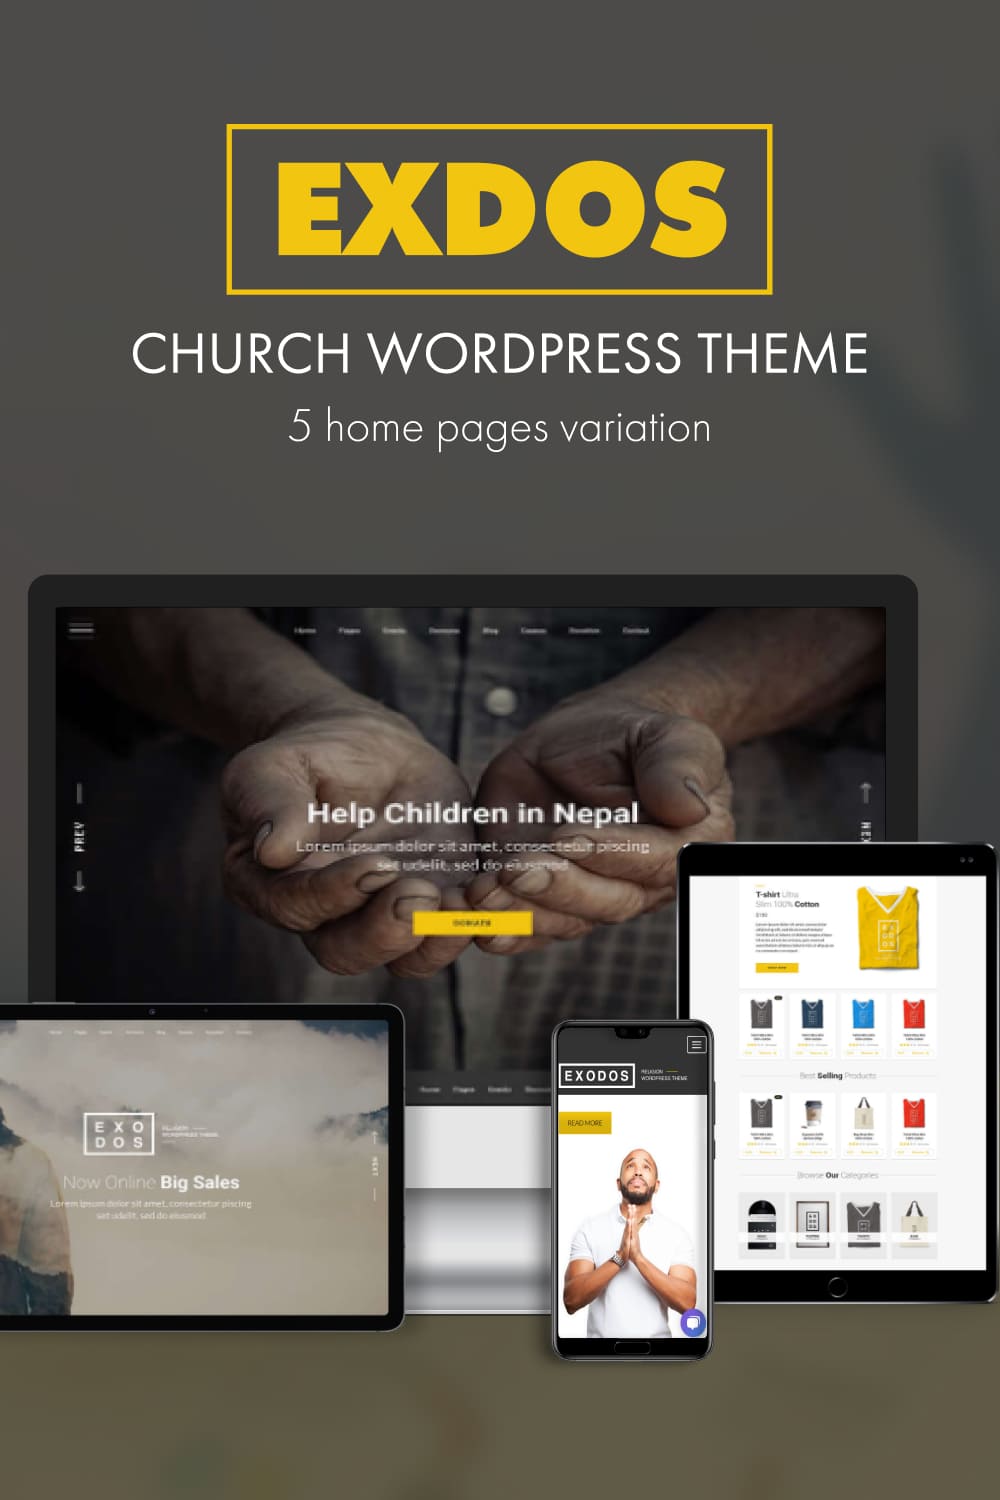 5 home pages variation of Exdos church wordpress theme.